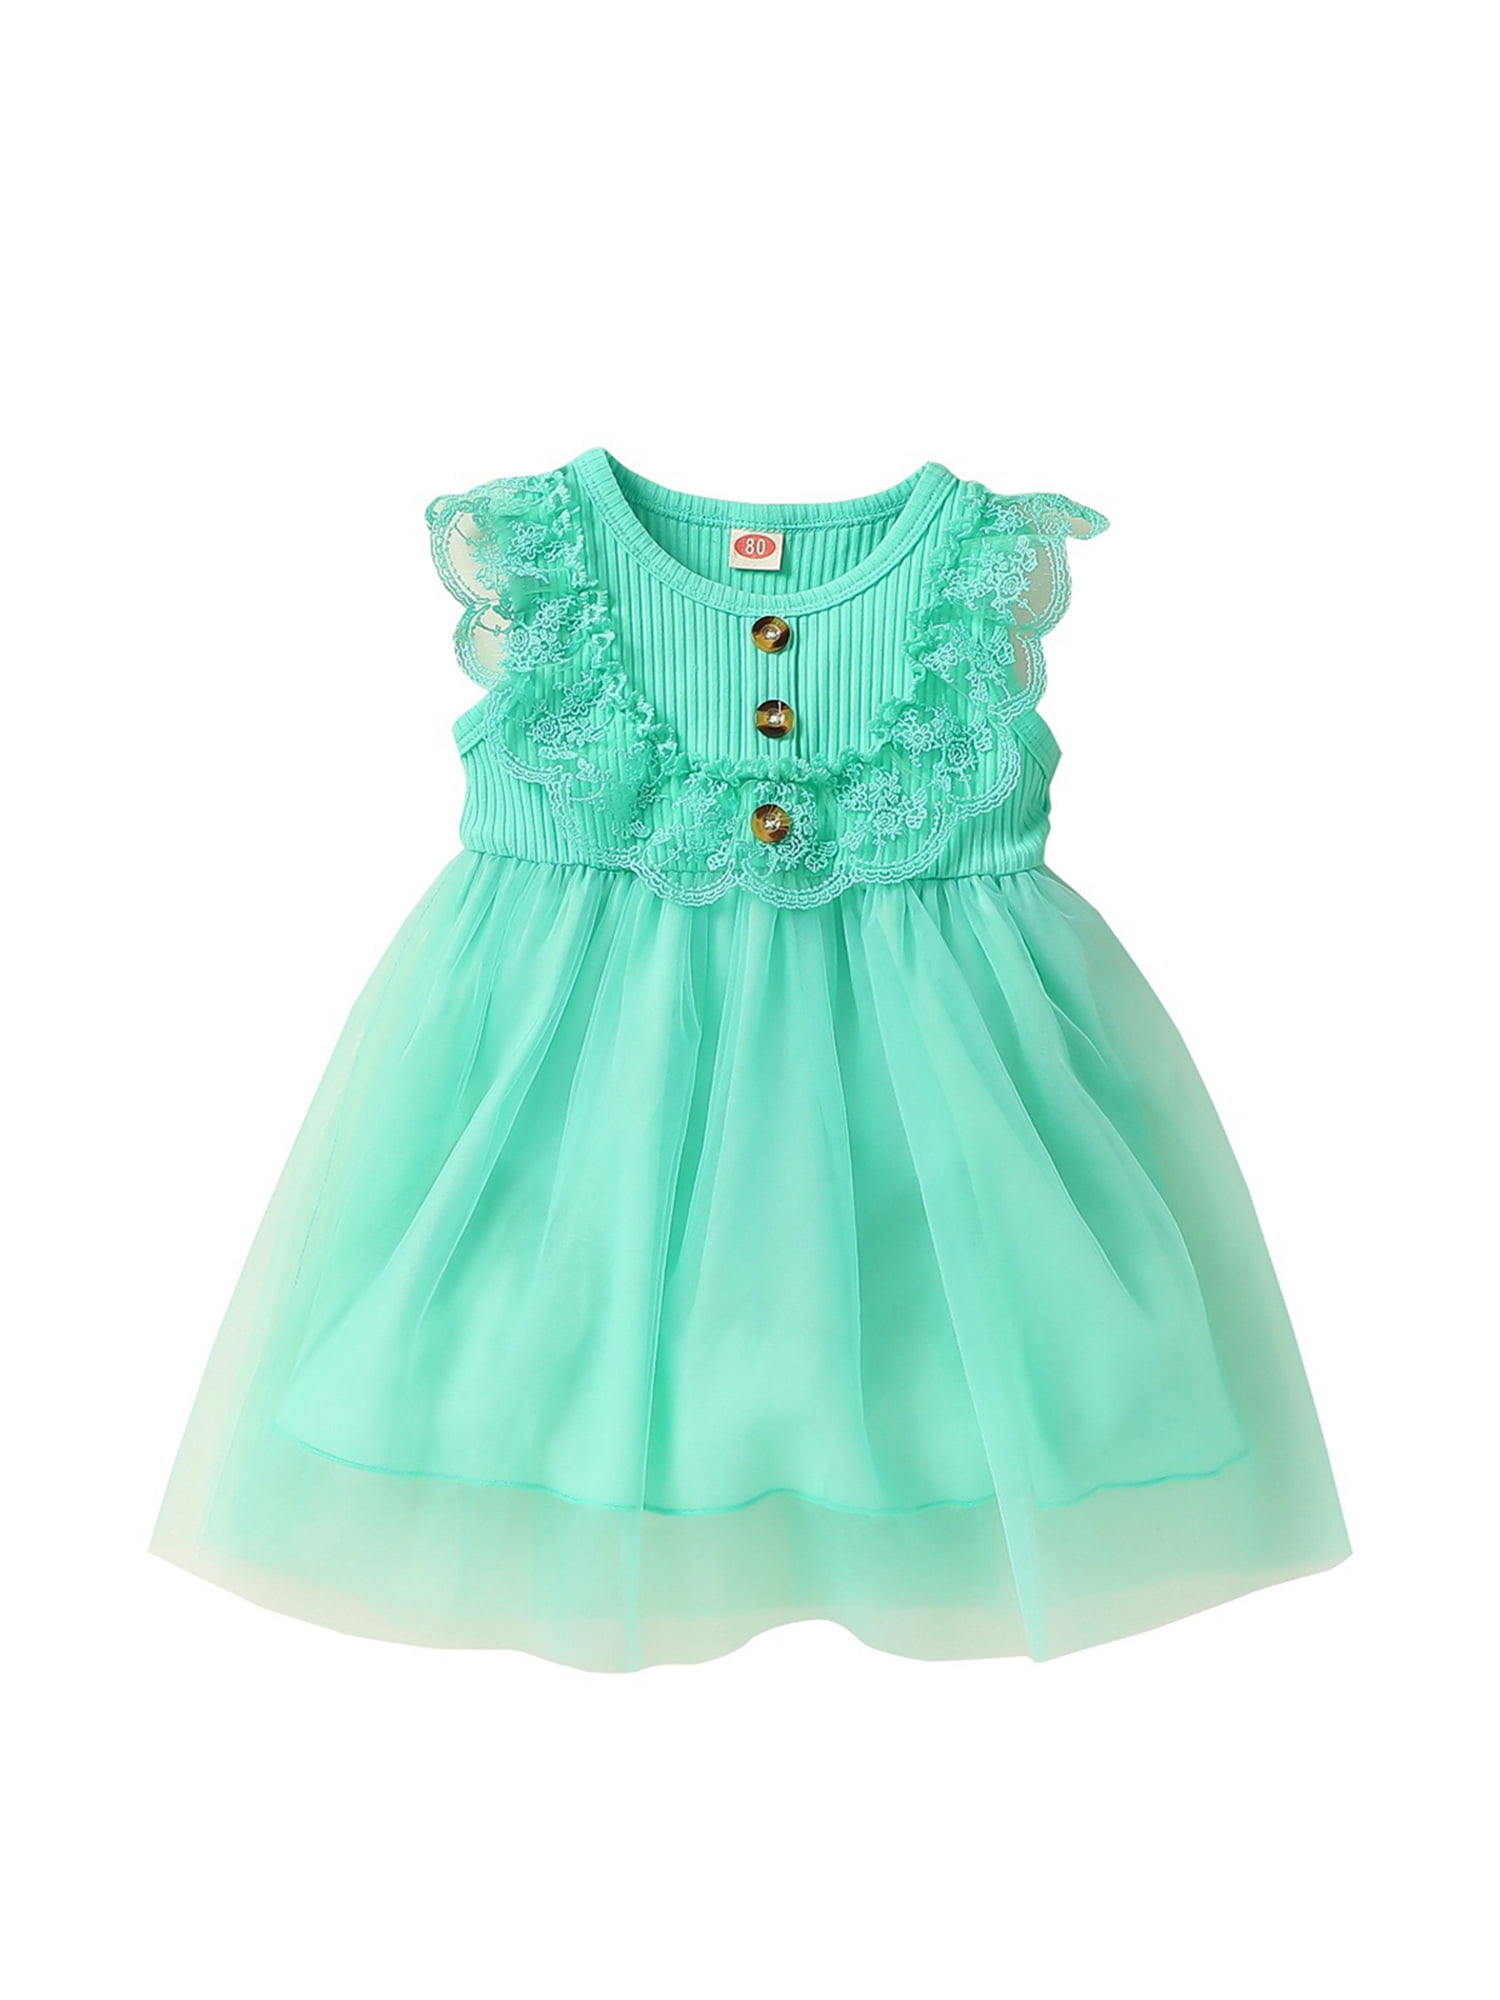 Canrulo Toddler Baby Girl Summer Dress Lace Ruffle Solid Color Tulle ...